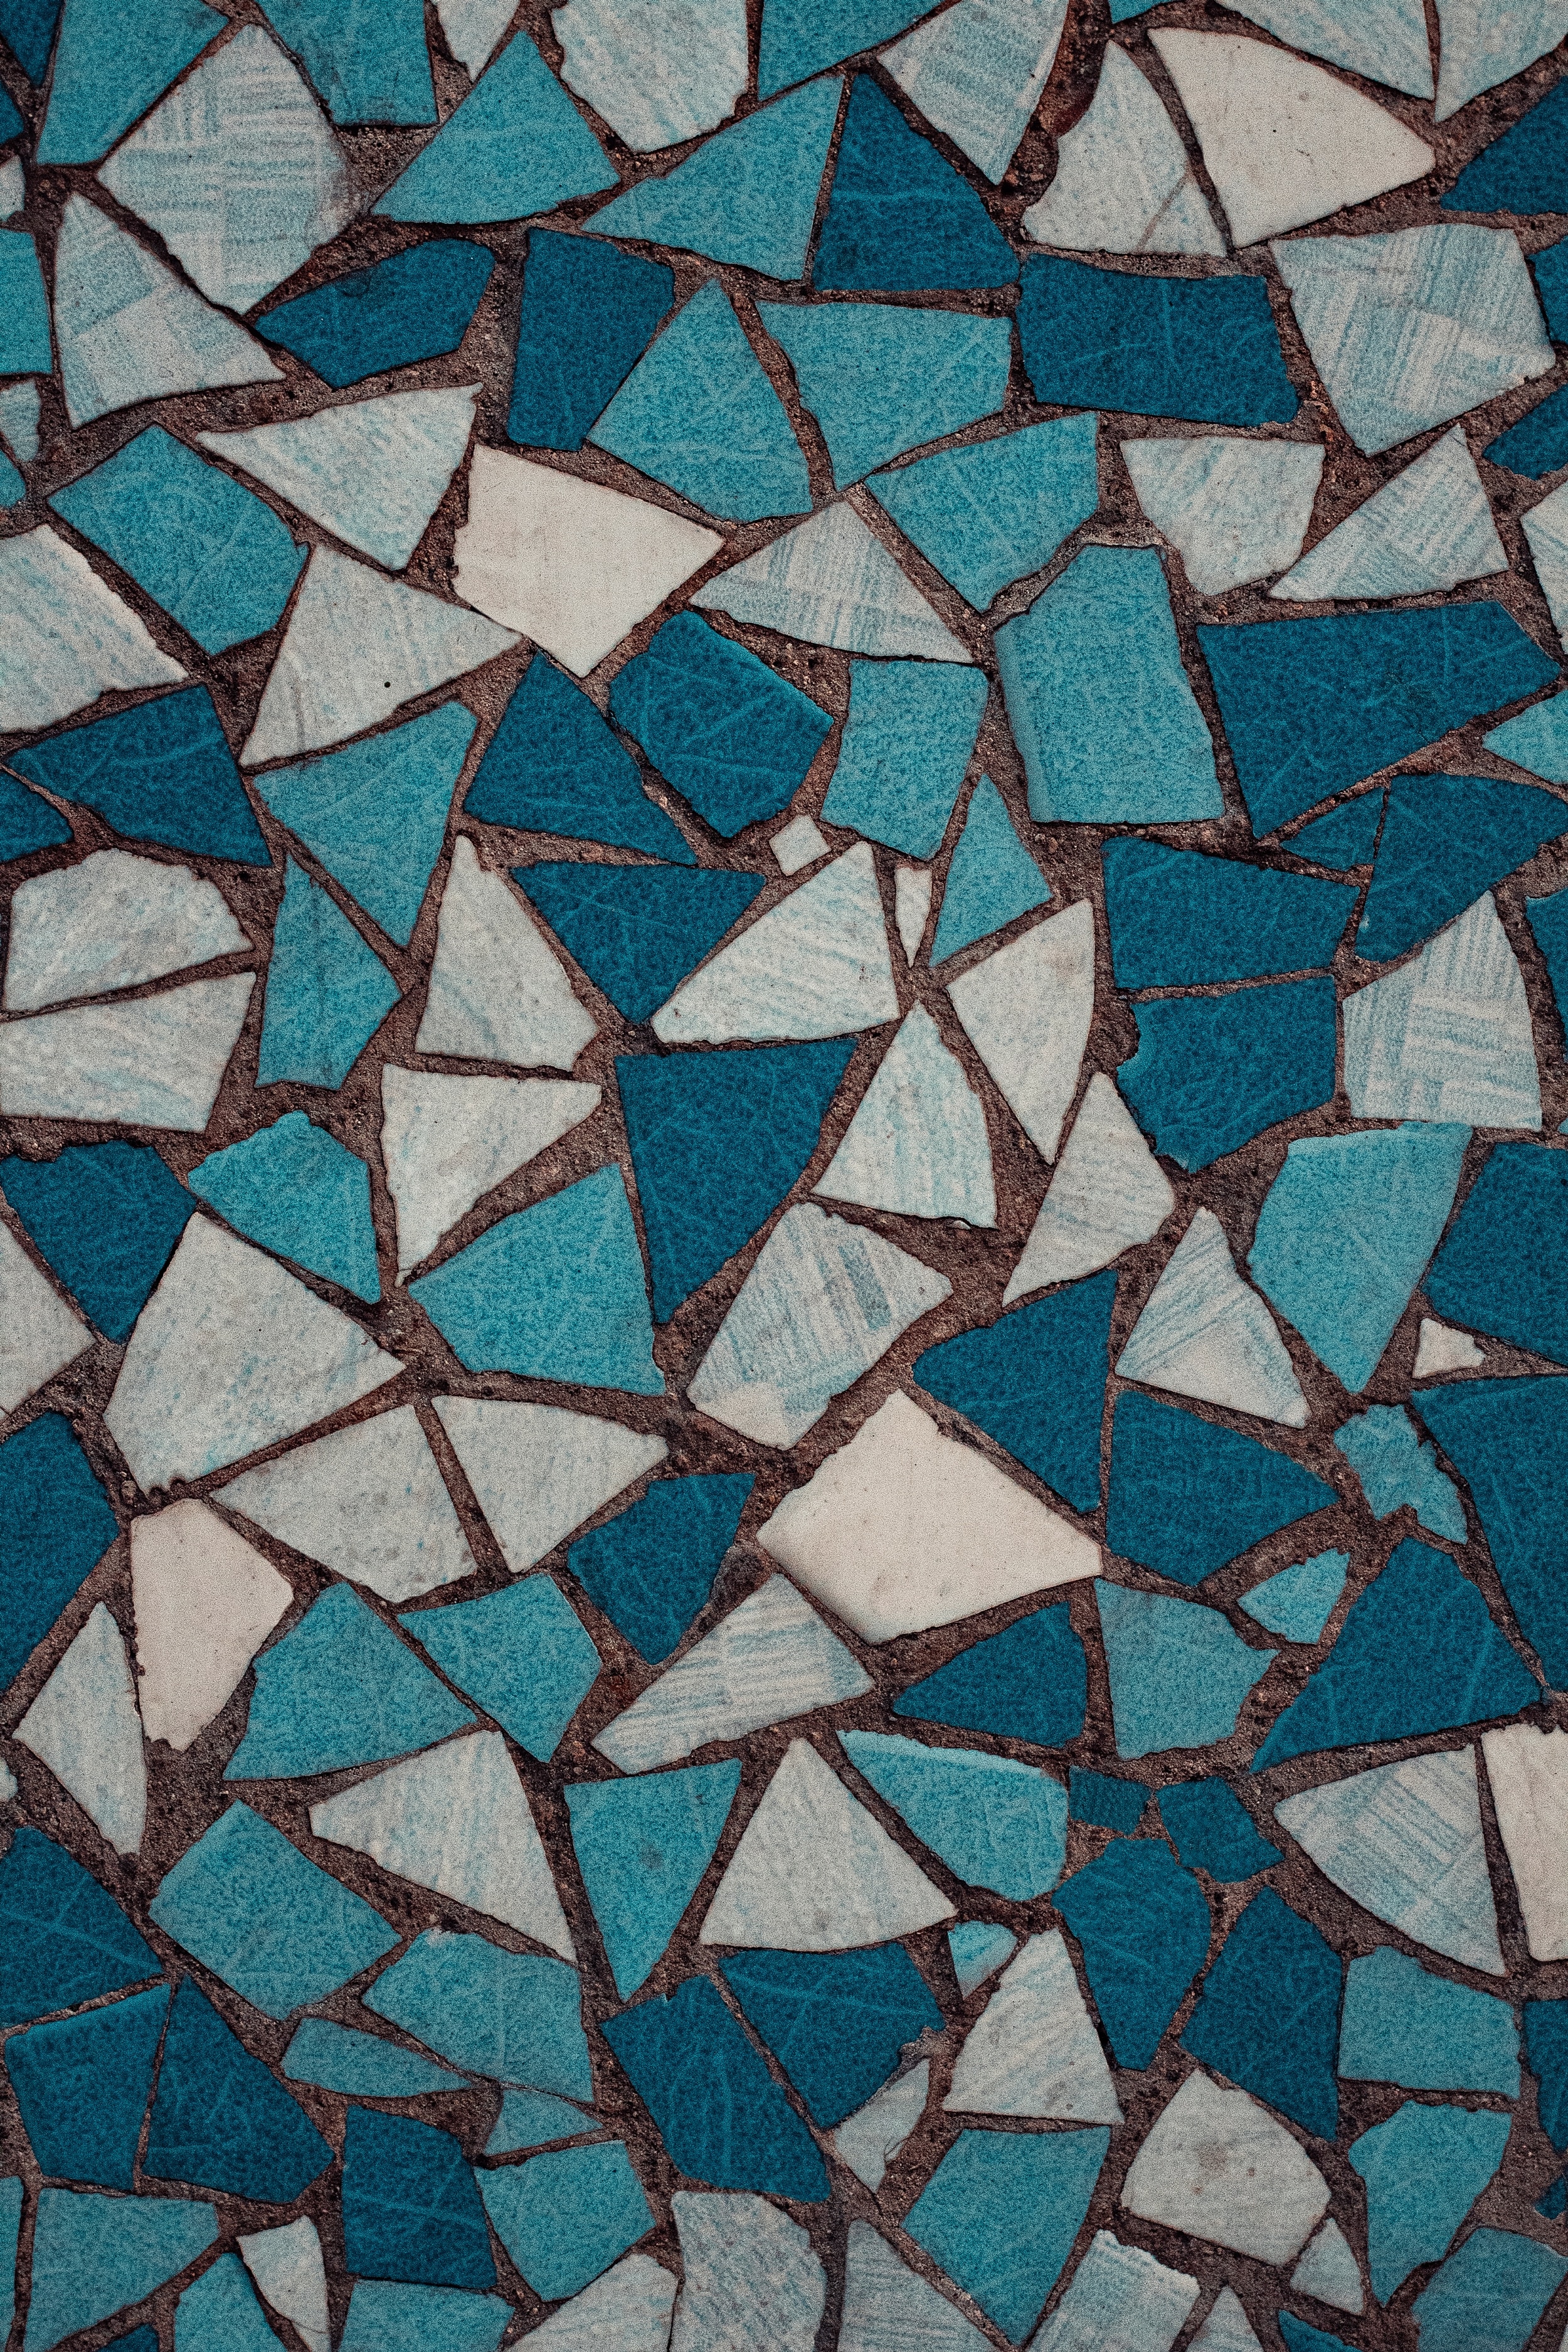 mosaic, textures, blue, white, texture, shards, smithereens